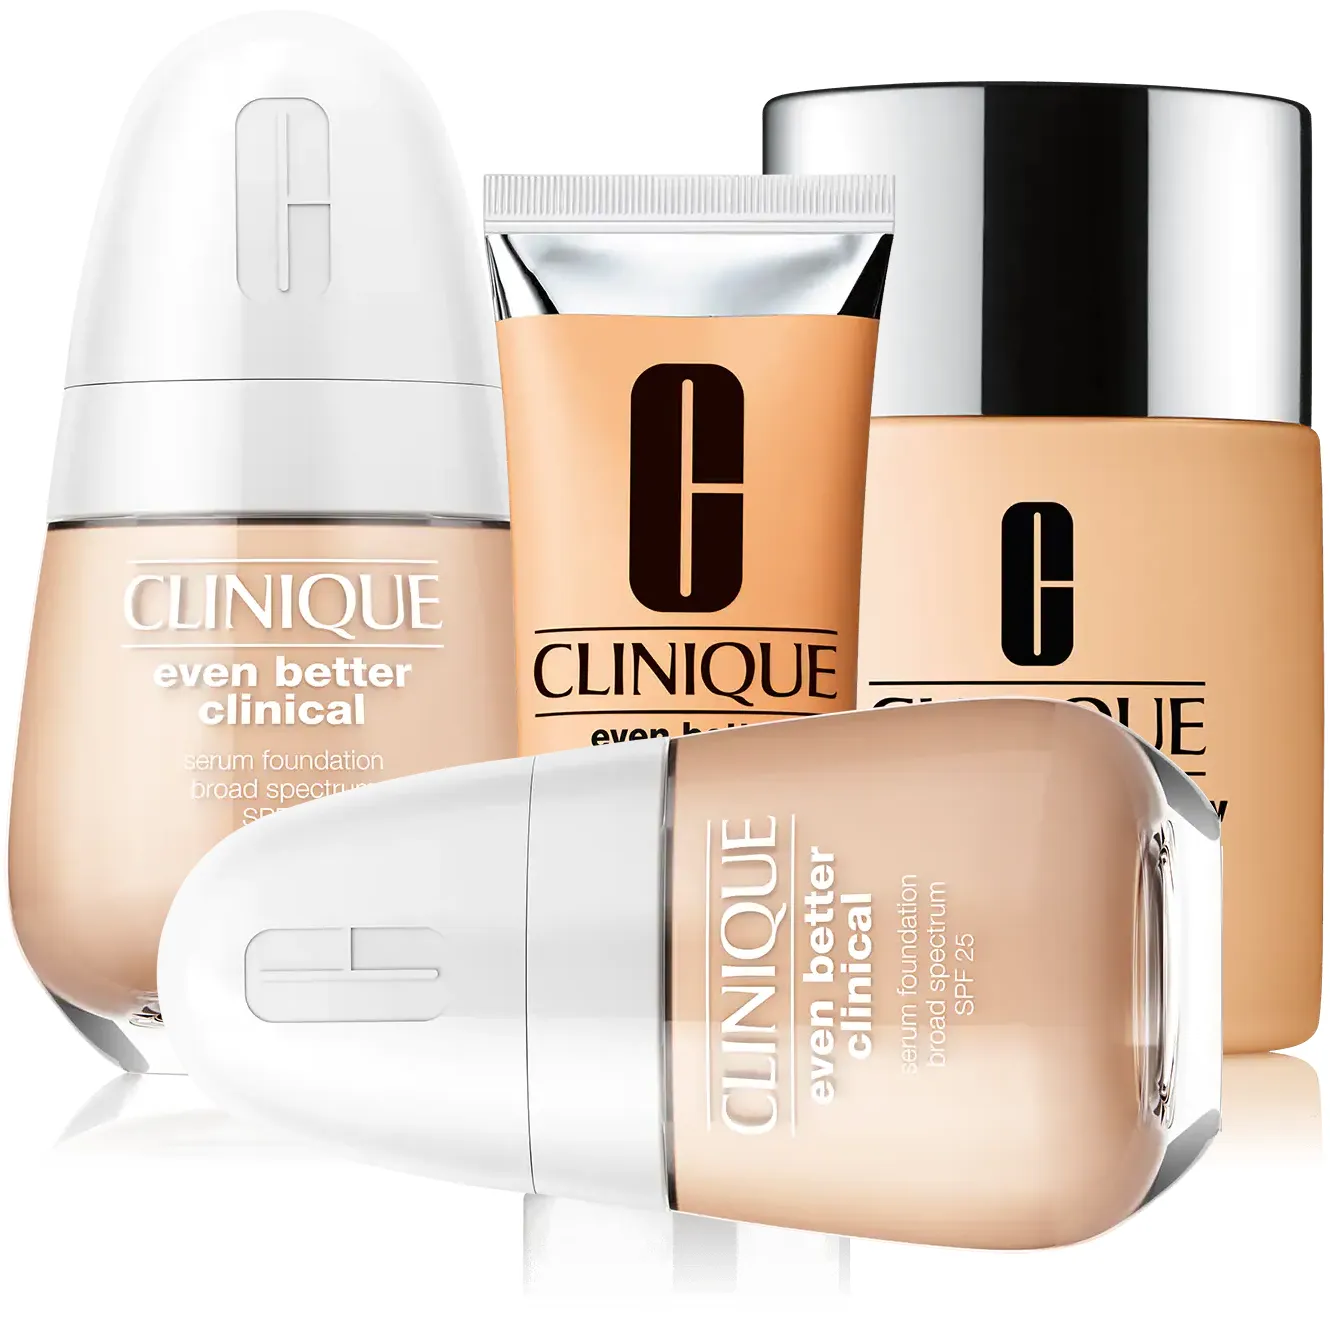 Free Sample Of Clinique Foundation